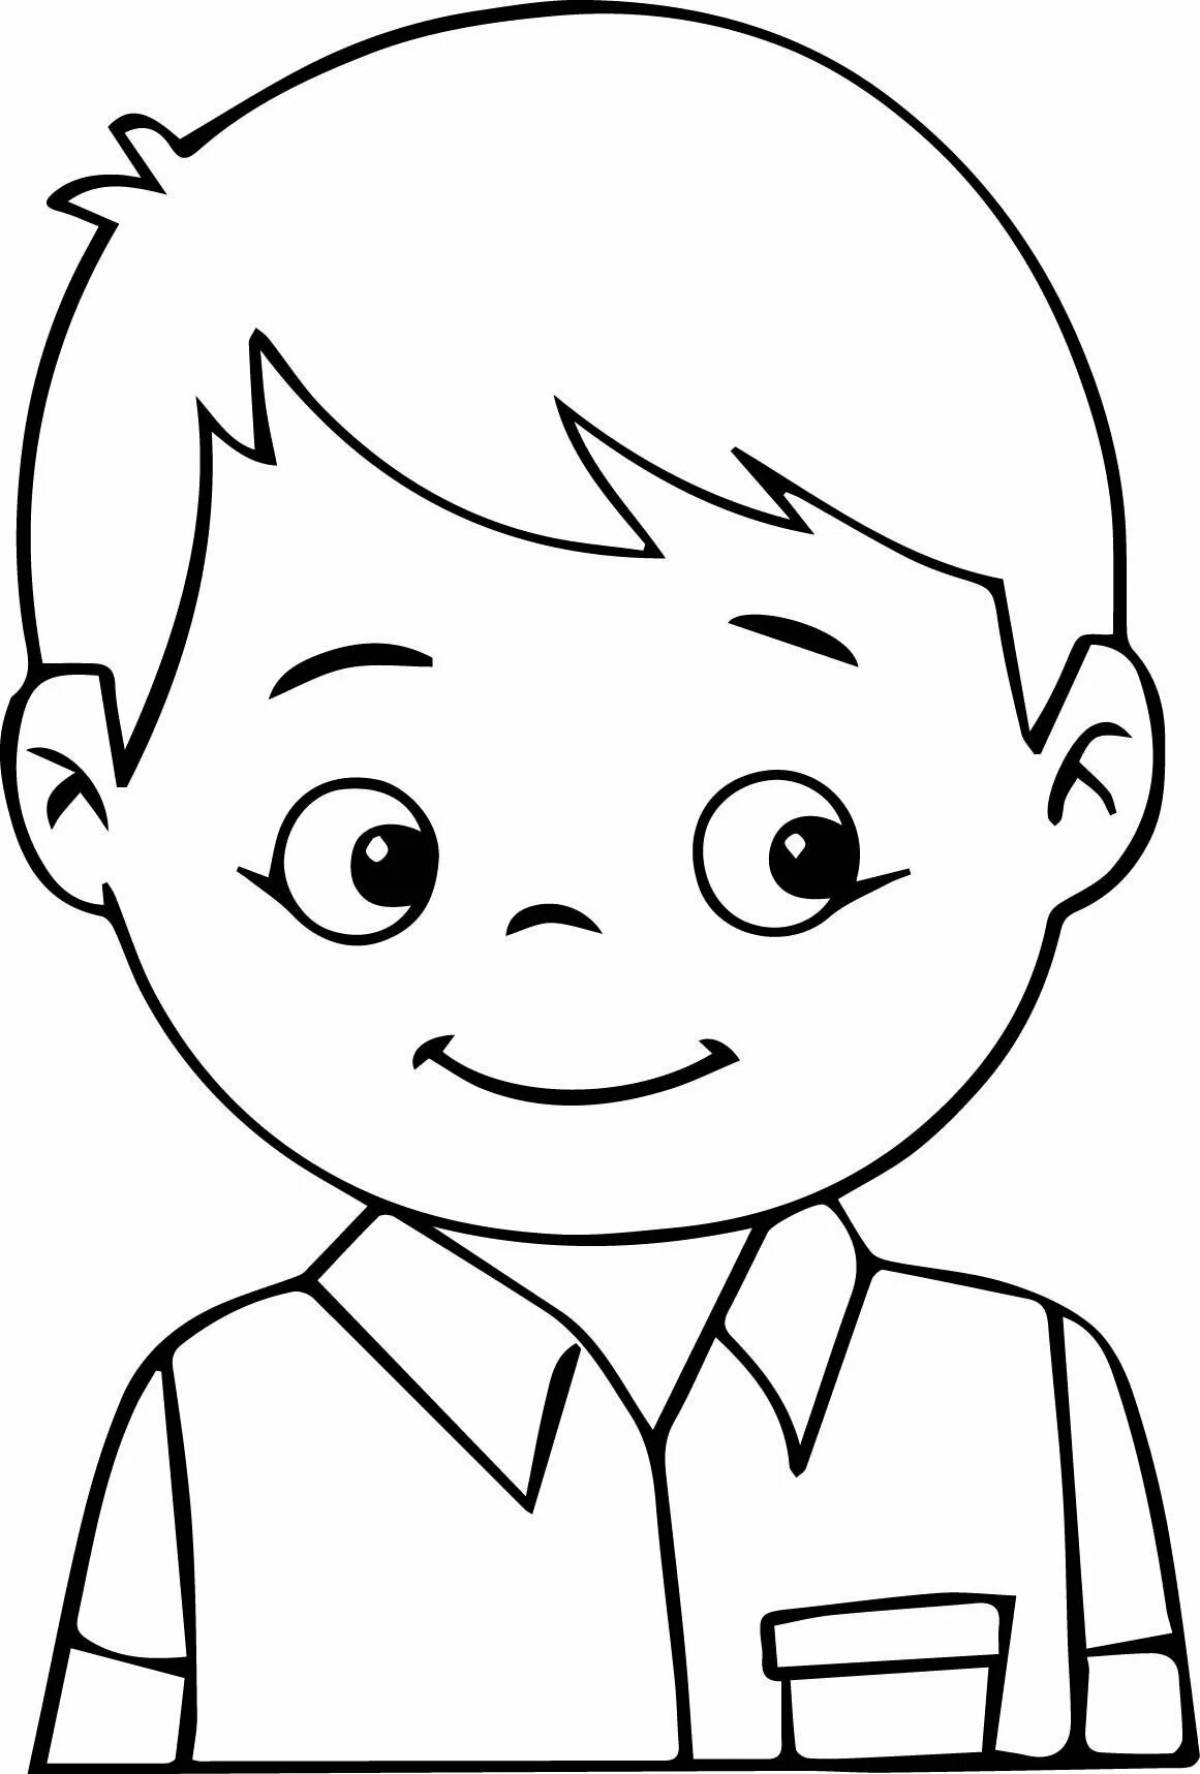 Gorgeous baby face coloring book for kids